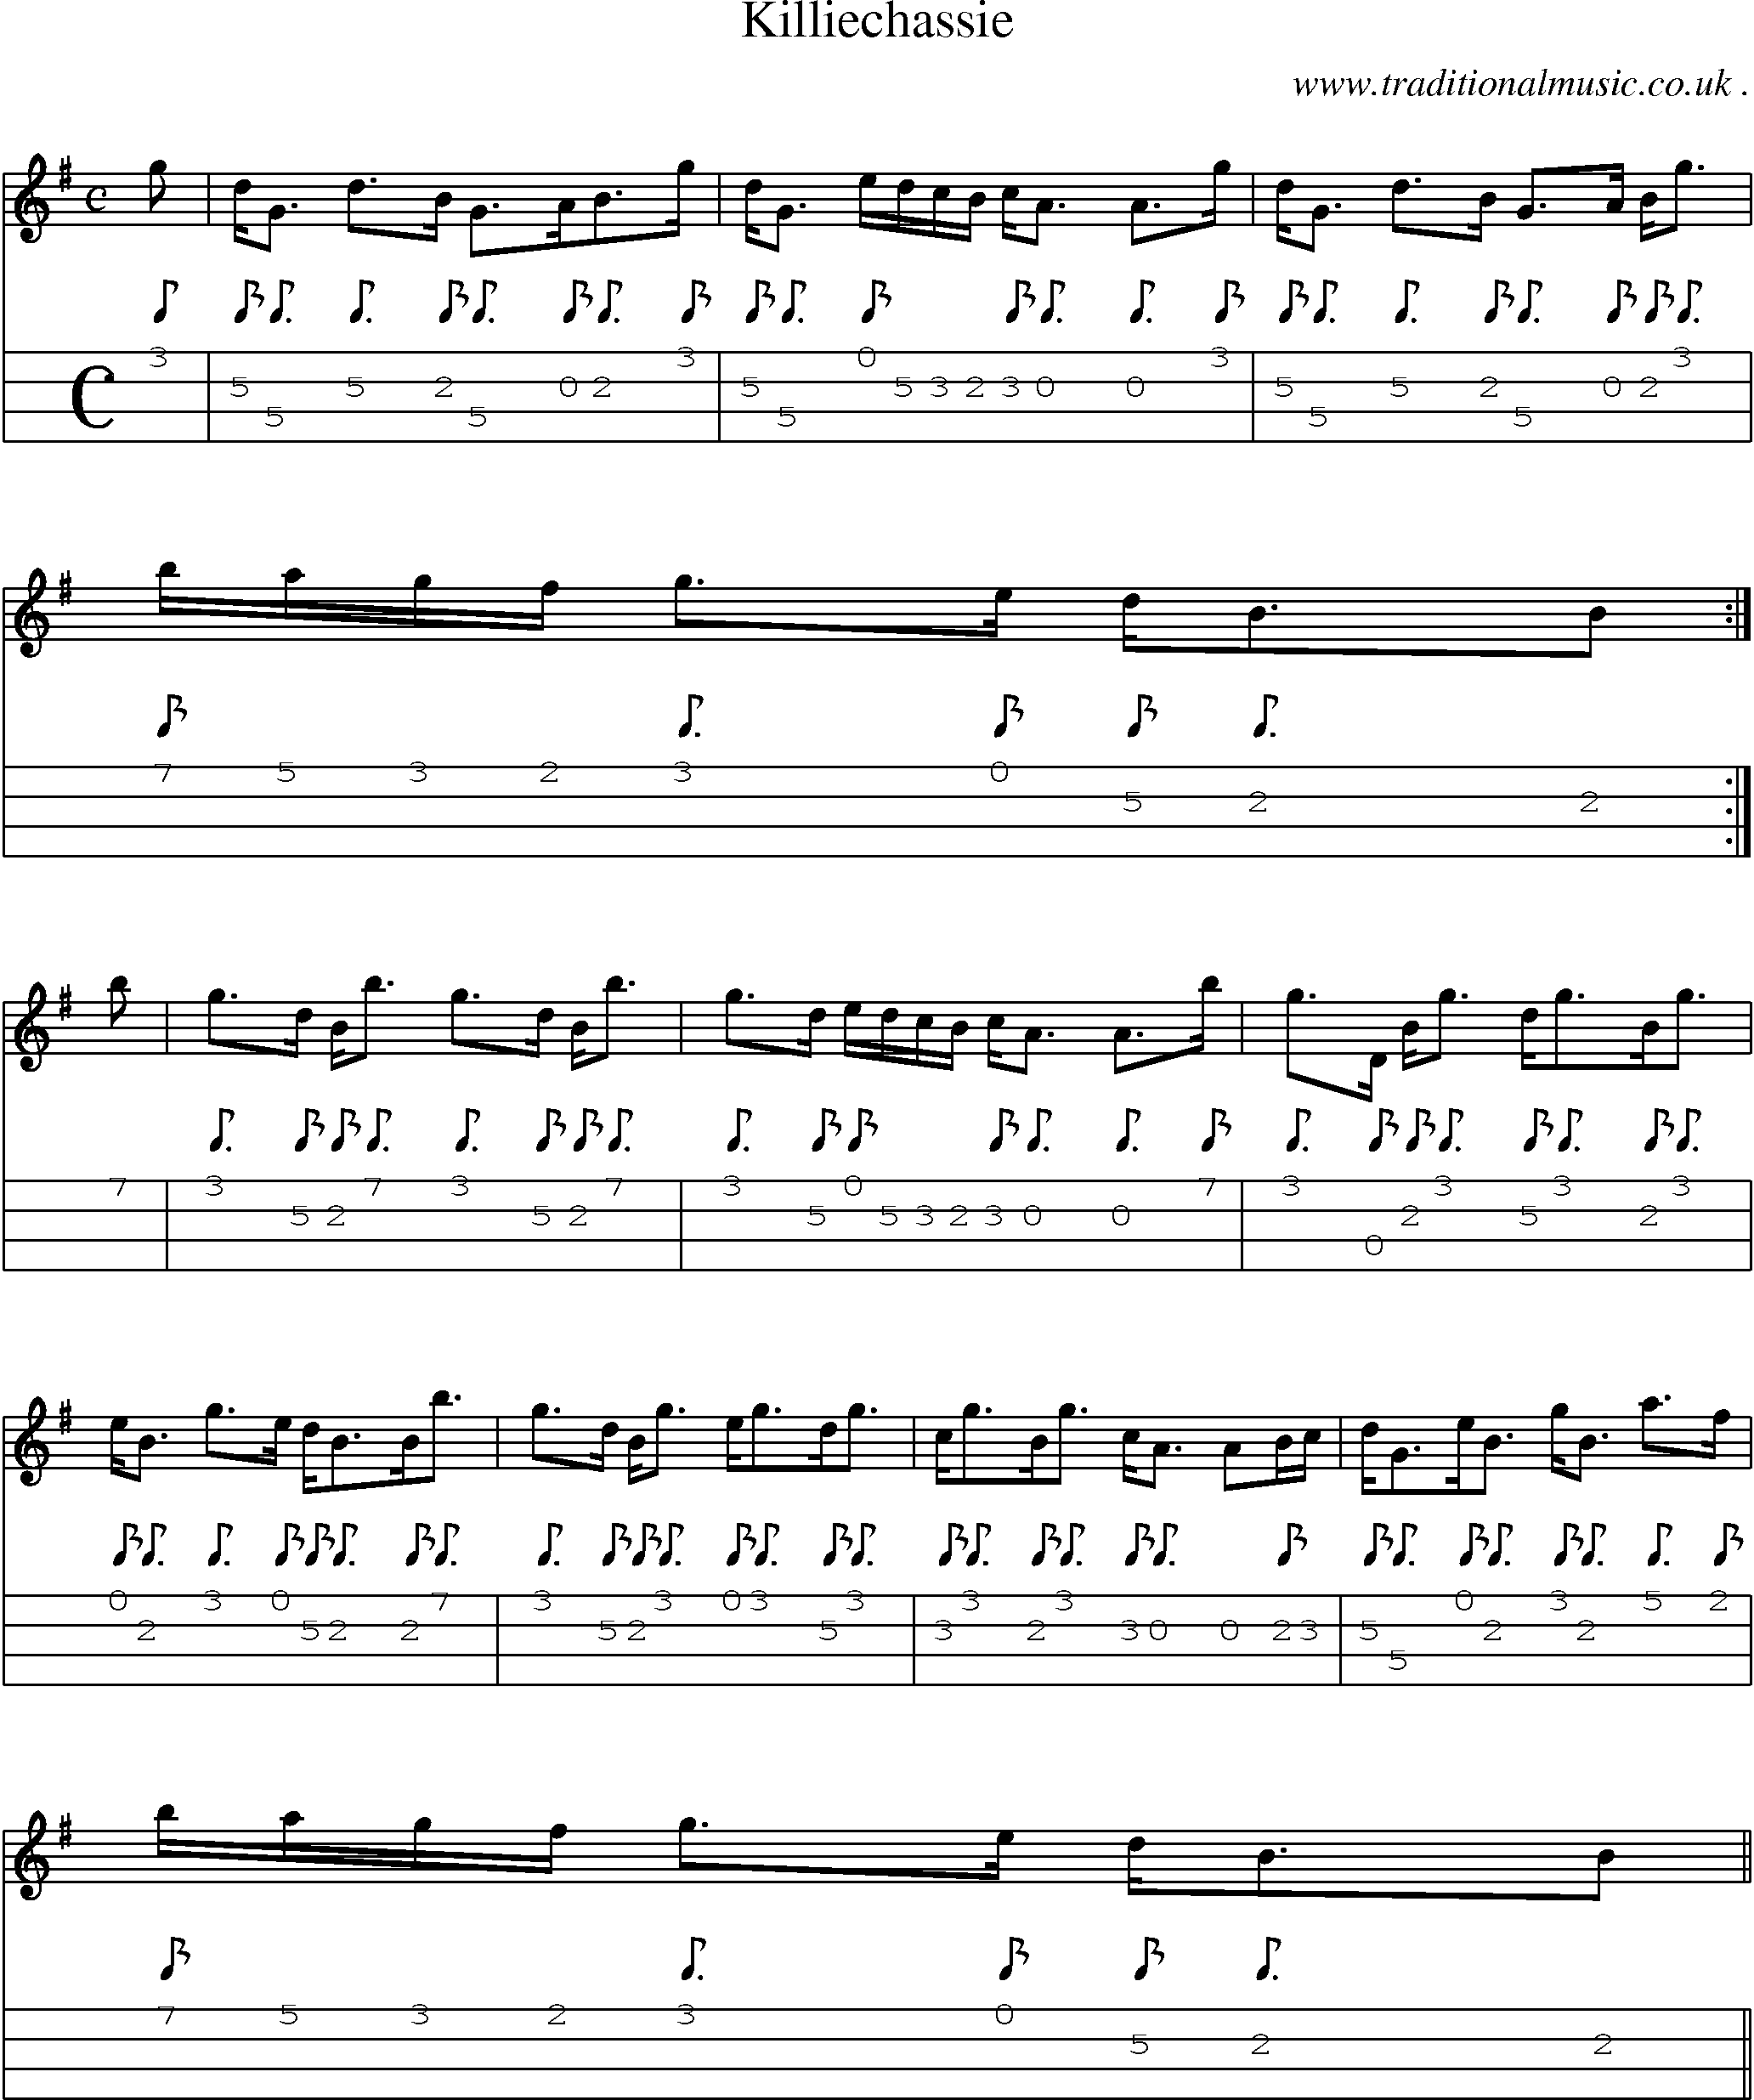 Sheet-music  score, Chords and Mandolin Tabs for Killiechassie